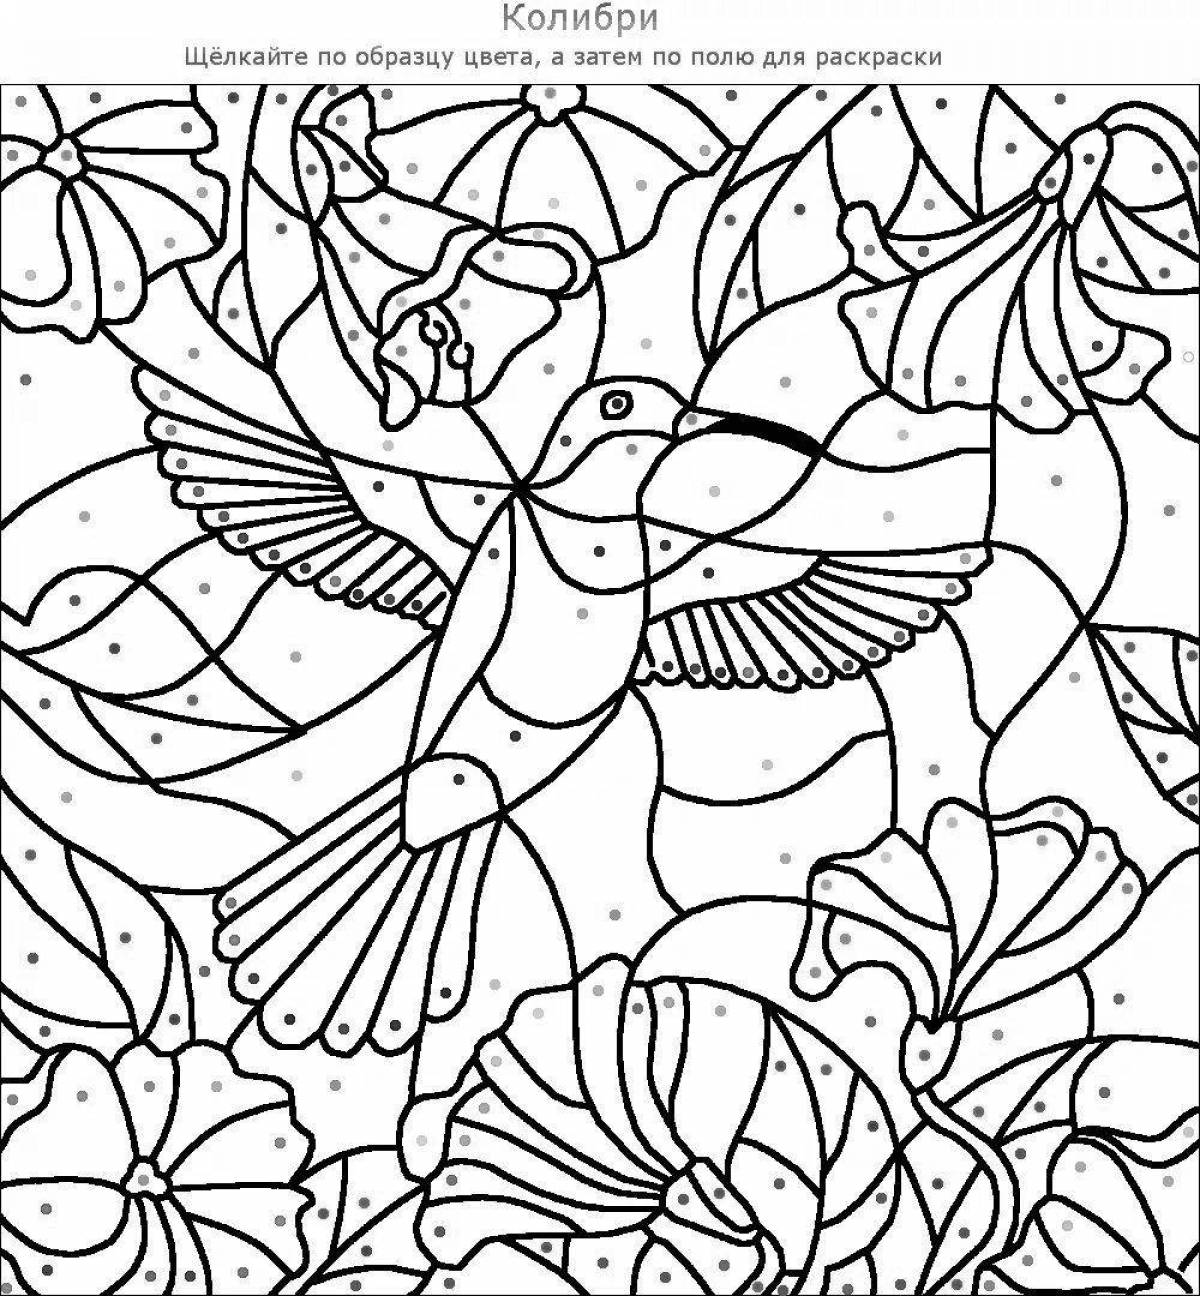 Humorous coloring book enable color by number